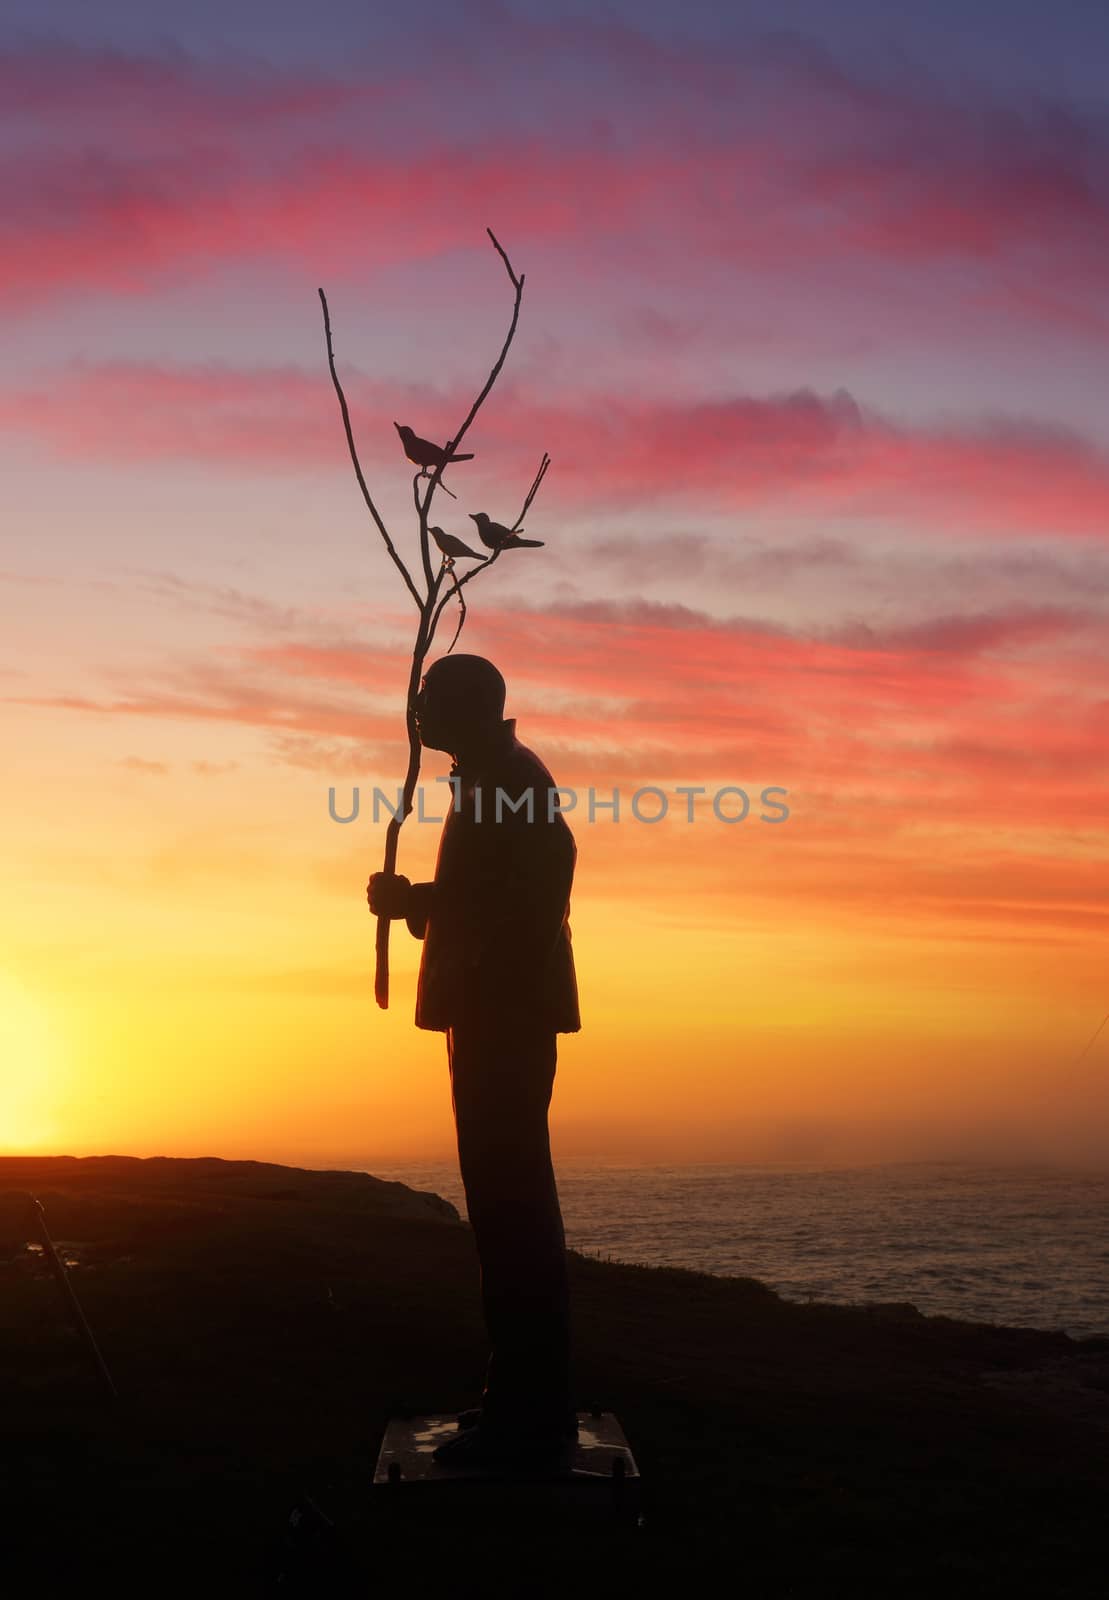 Man Playing with Birds Silhouette by lovleah